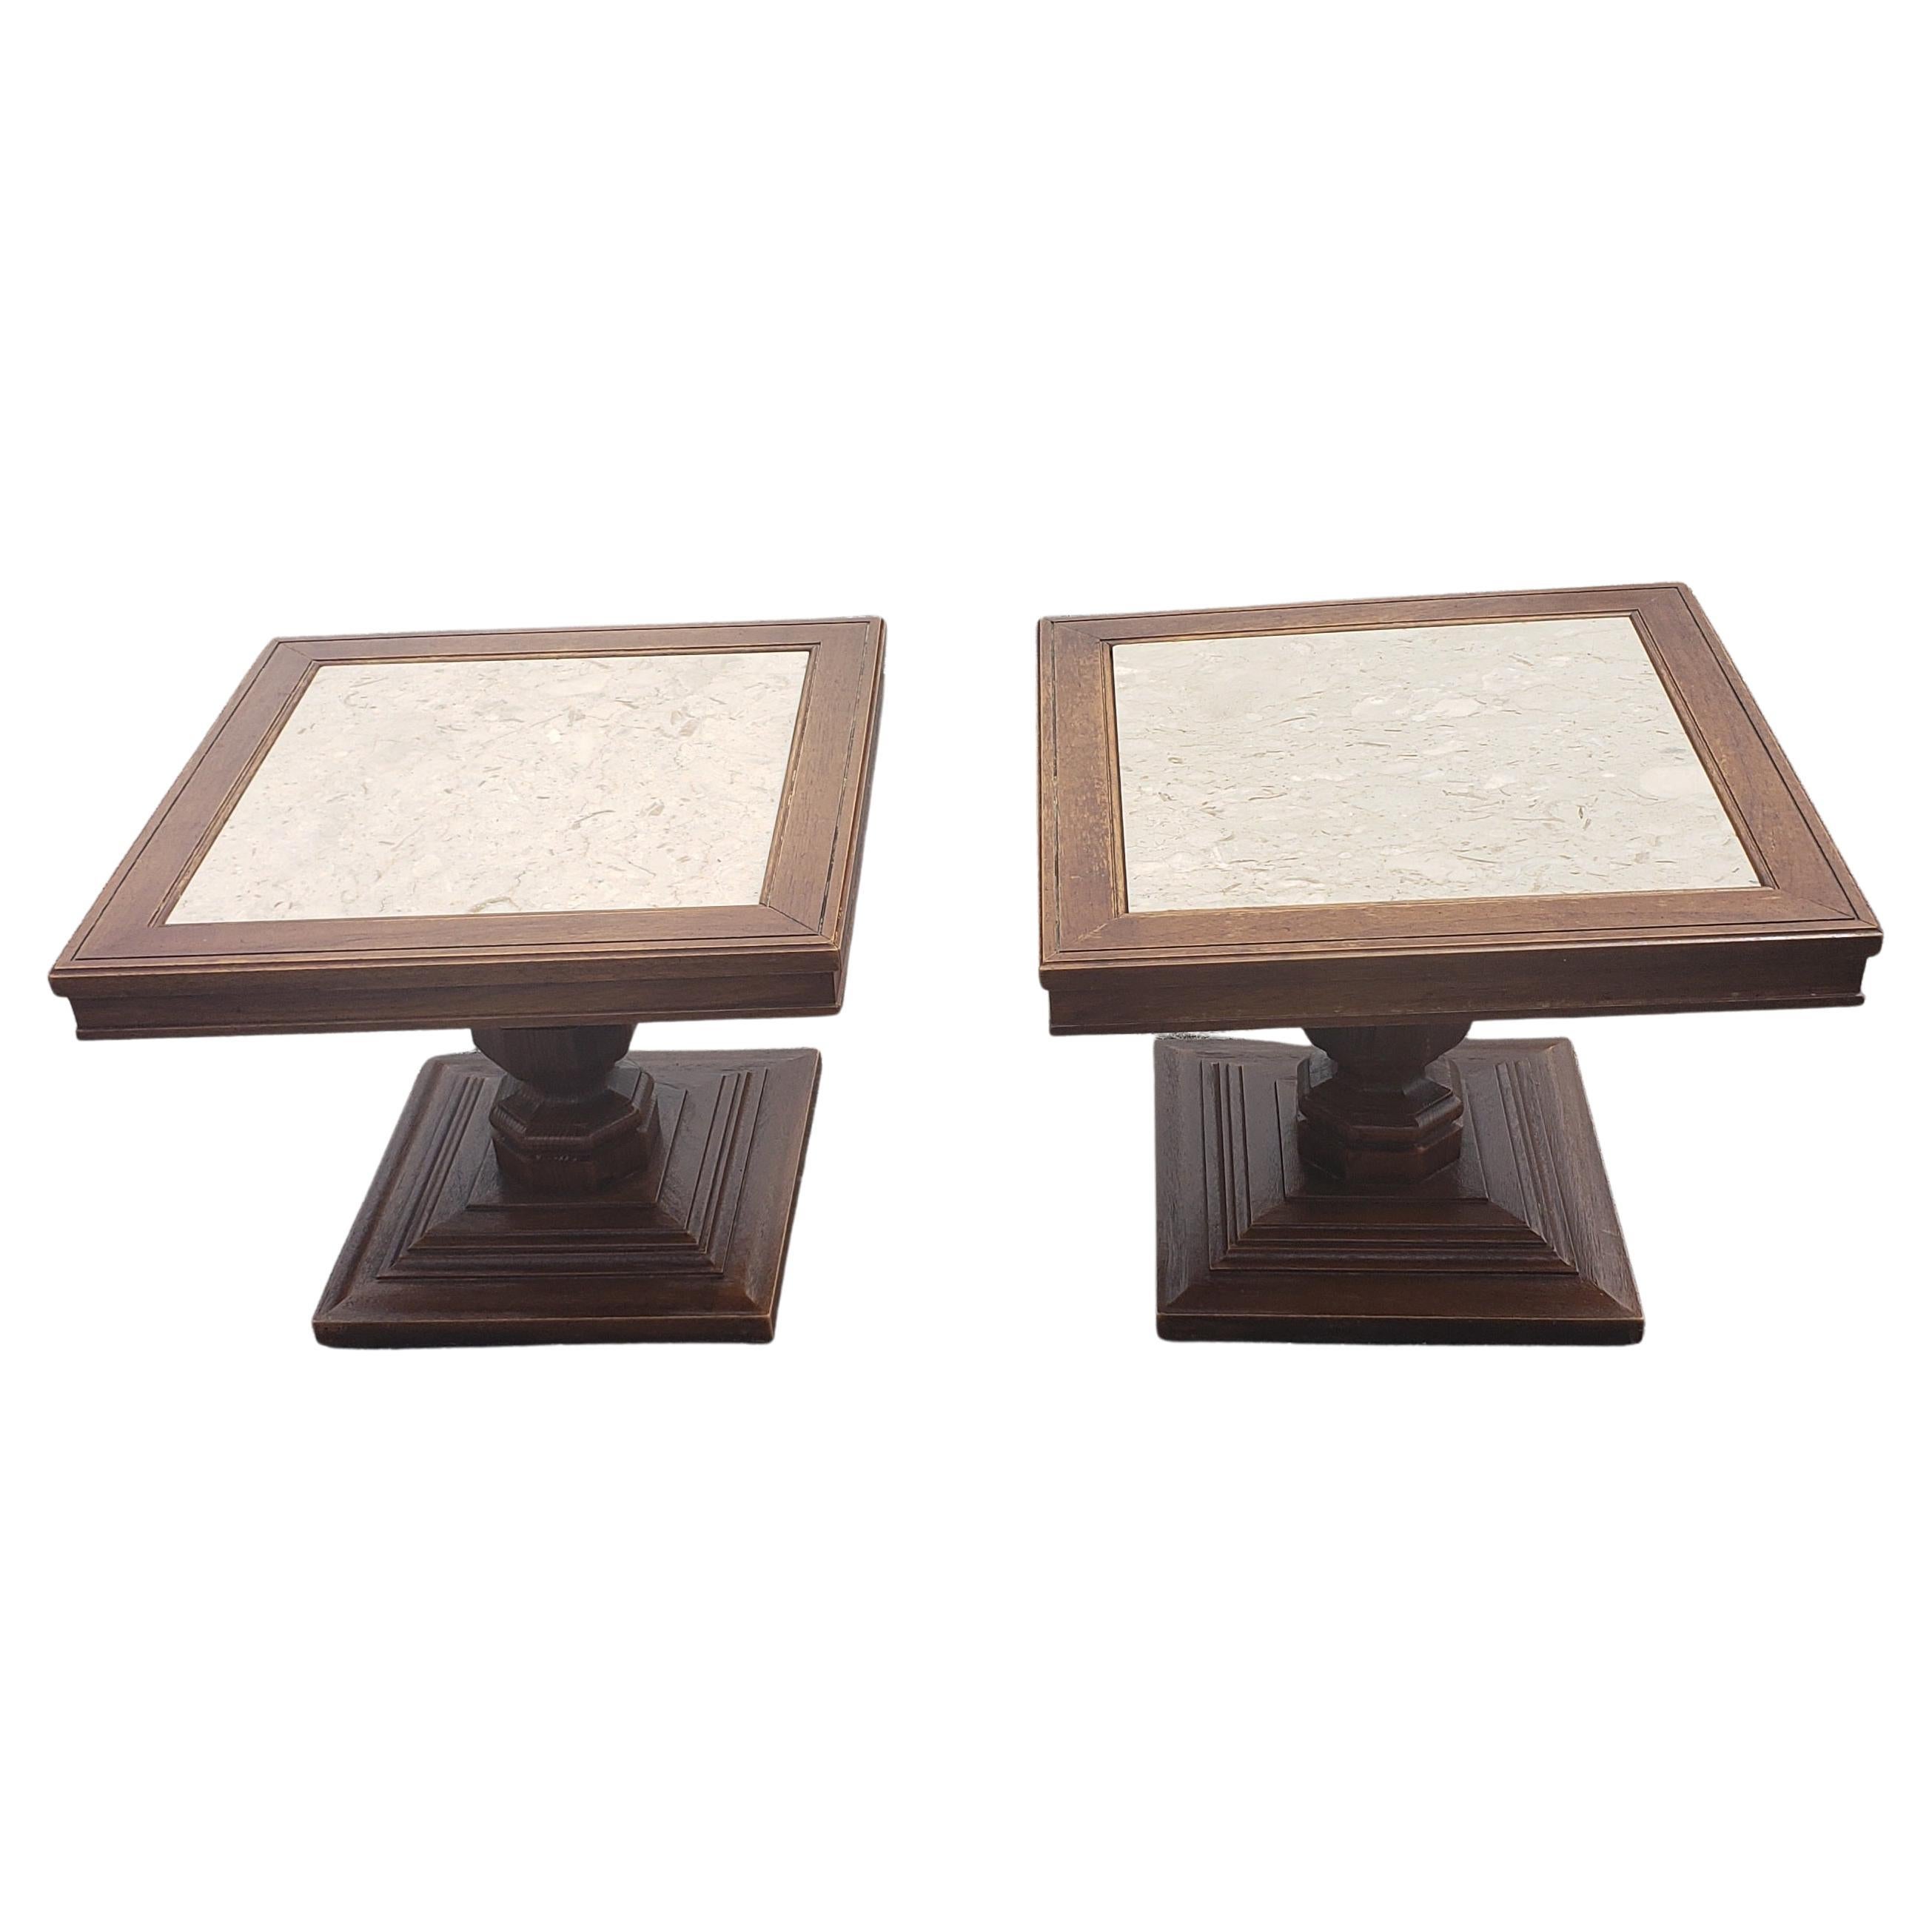 20th Century 1960s Italian Pedestal Oak Side Tables with Marble Top Inserts, a Pair For Sale